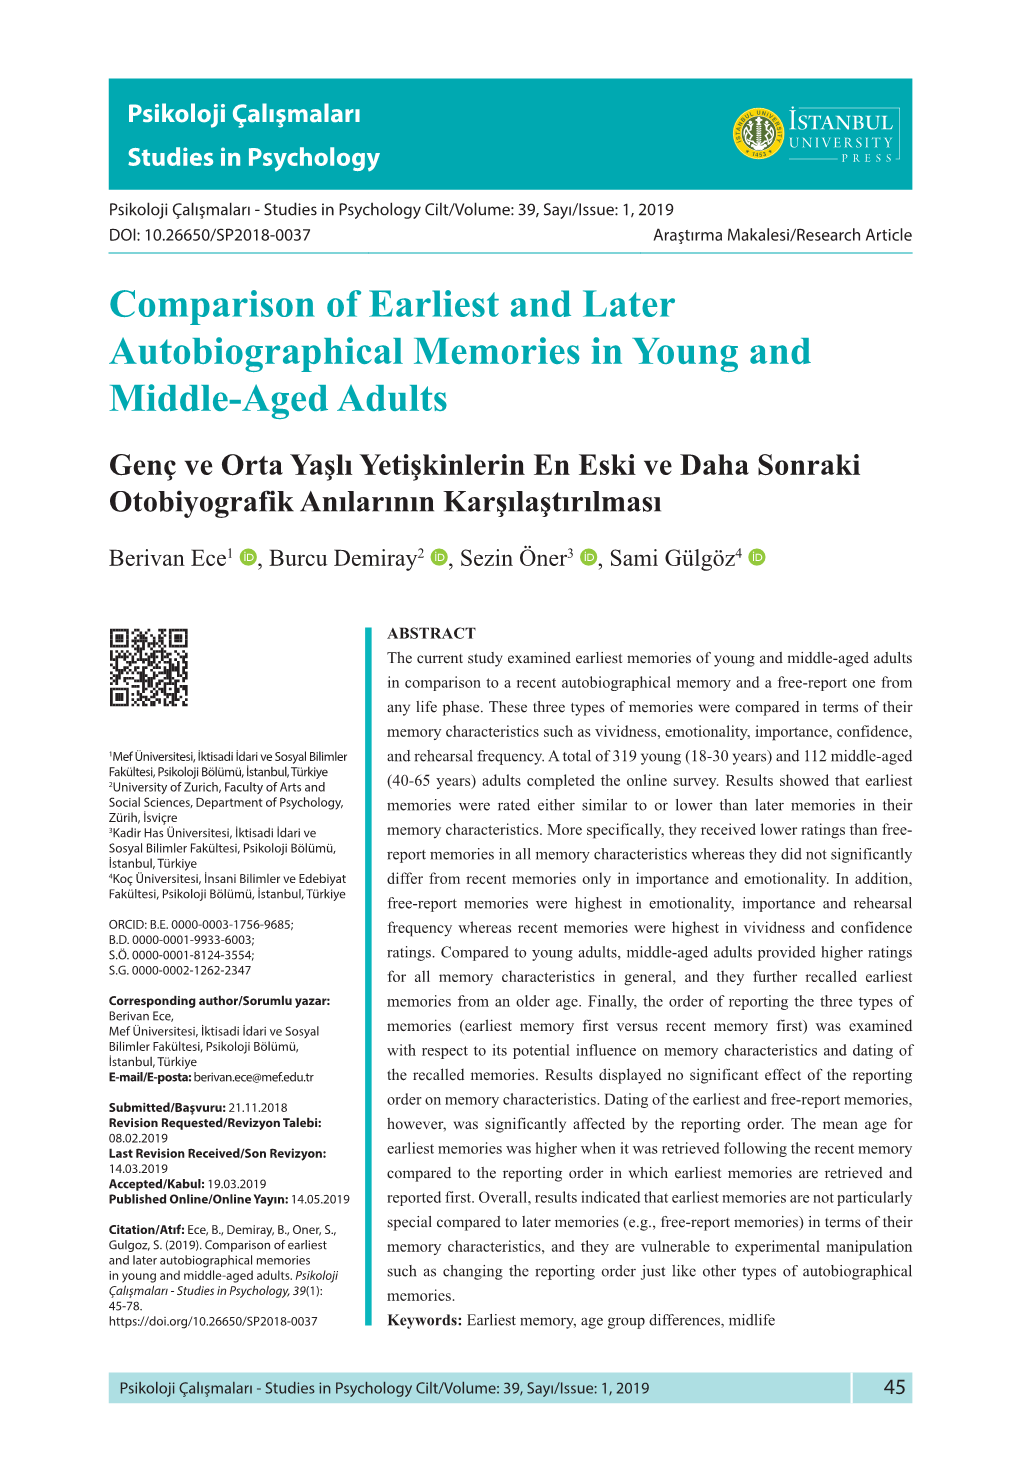 Comparison of Earliest and Later Autobiographical Memories in Young and Middle-Aged Adults